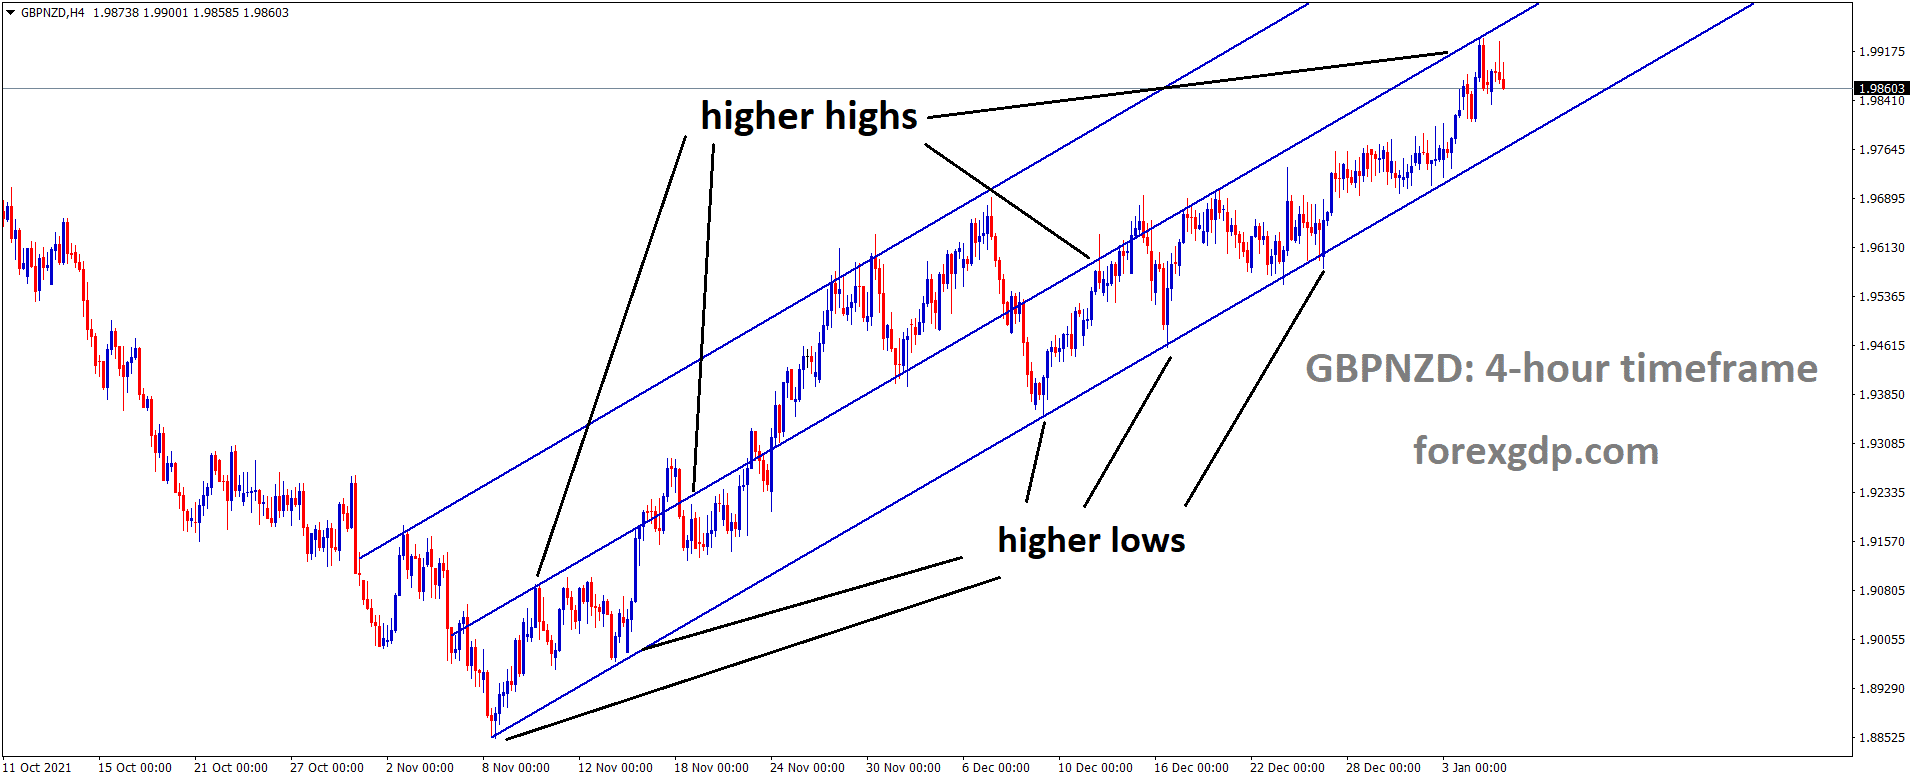 GBPNZD is moving in an Ascending channel and the market has fallen from the higher high area of the channel